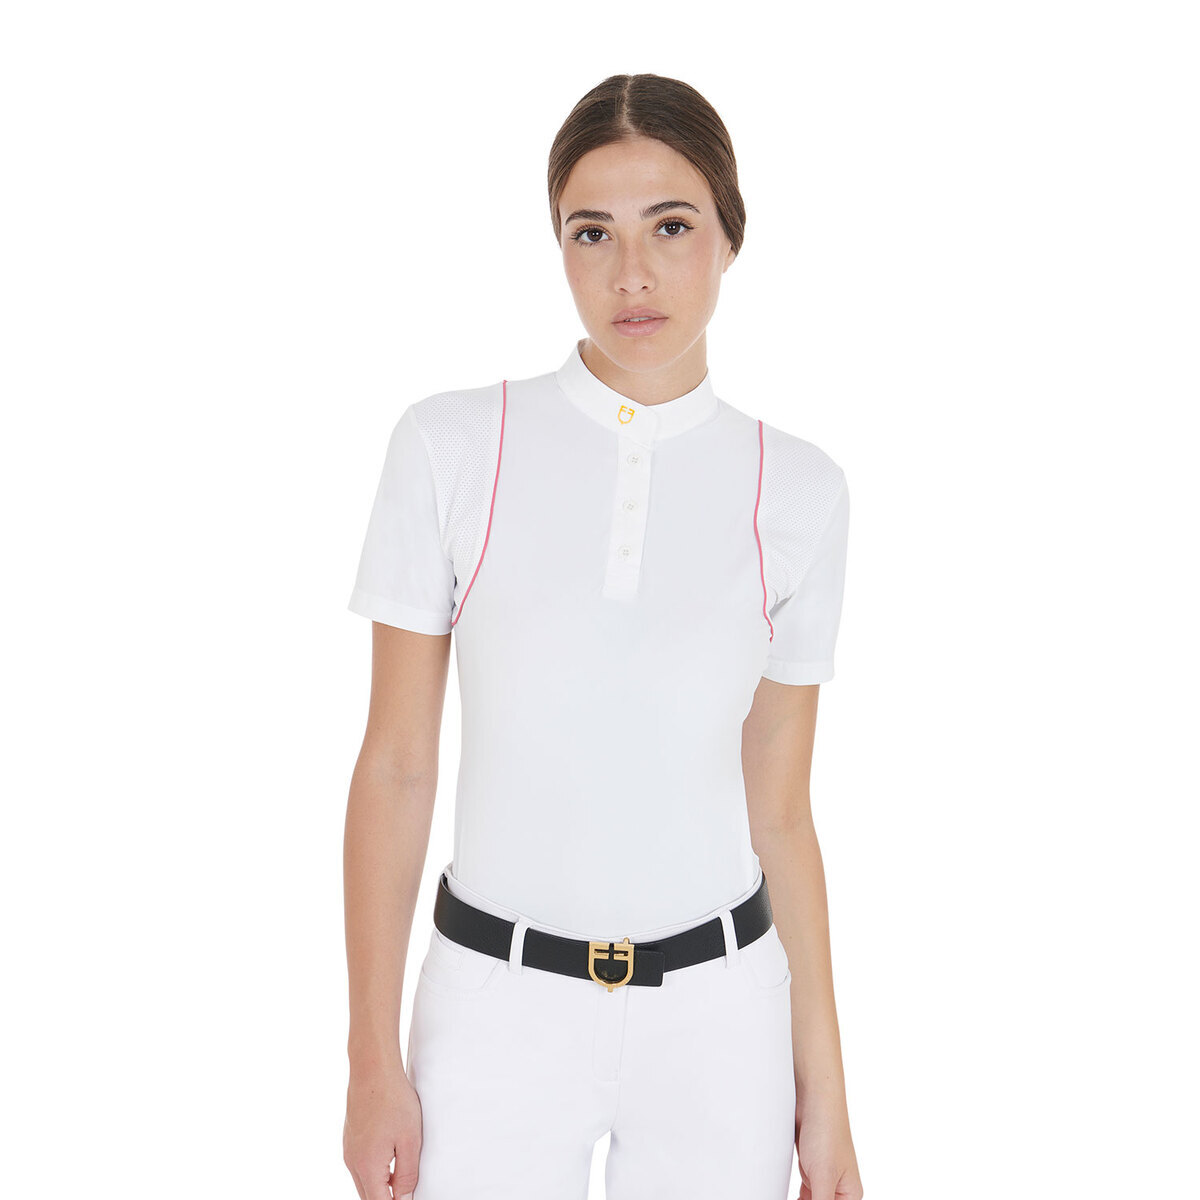 WOMEN'S COMPETITION POLO SHIRT SS BUTTONS